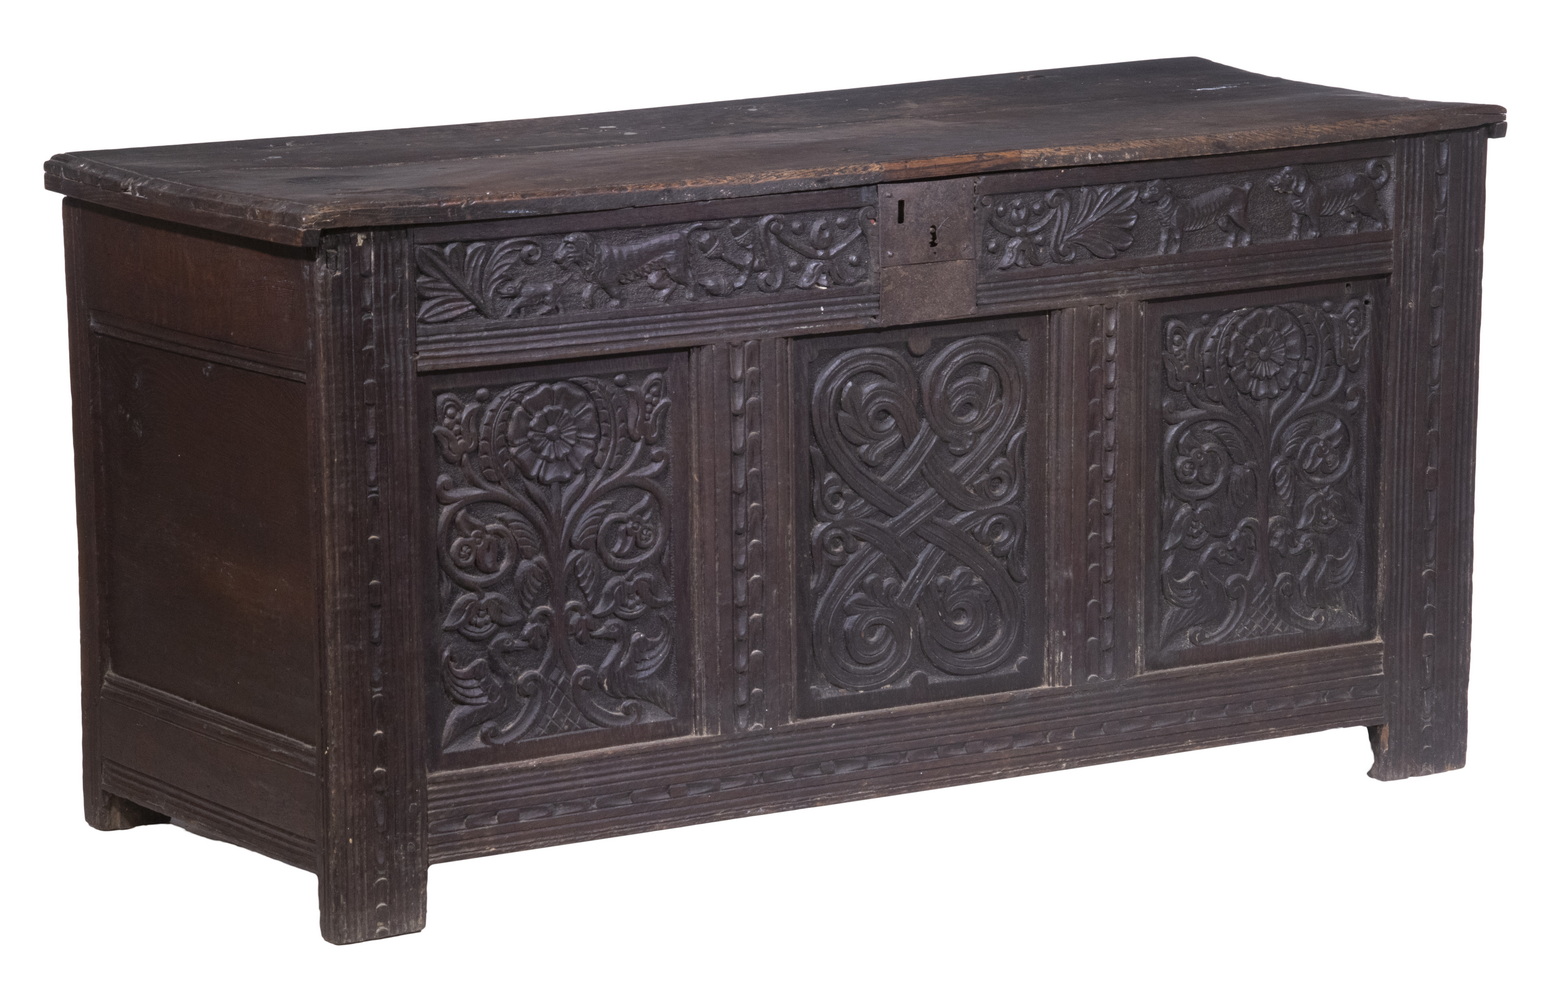 FINELY CARVED EARLY ENGLISH OAK 3b676f